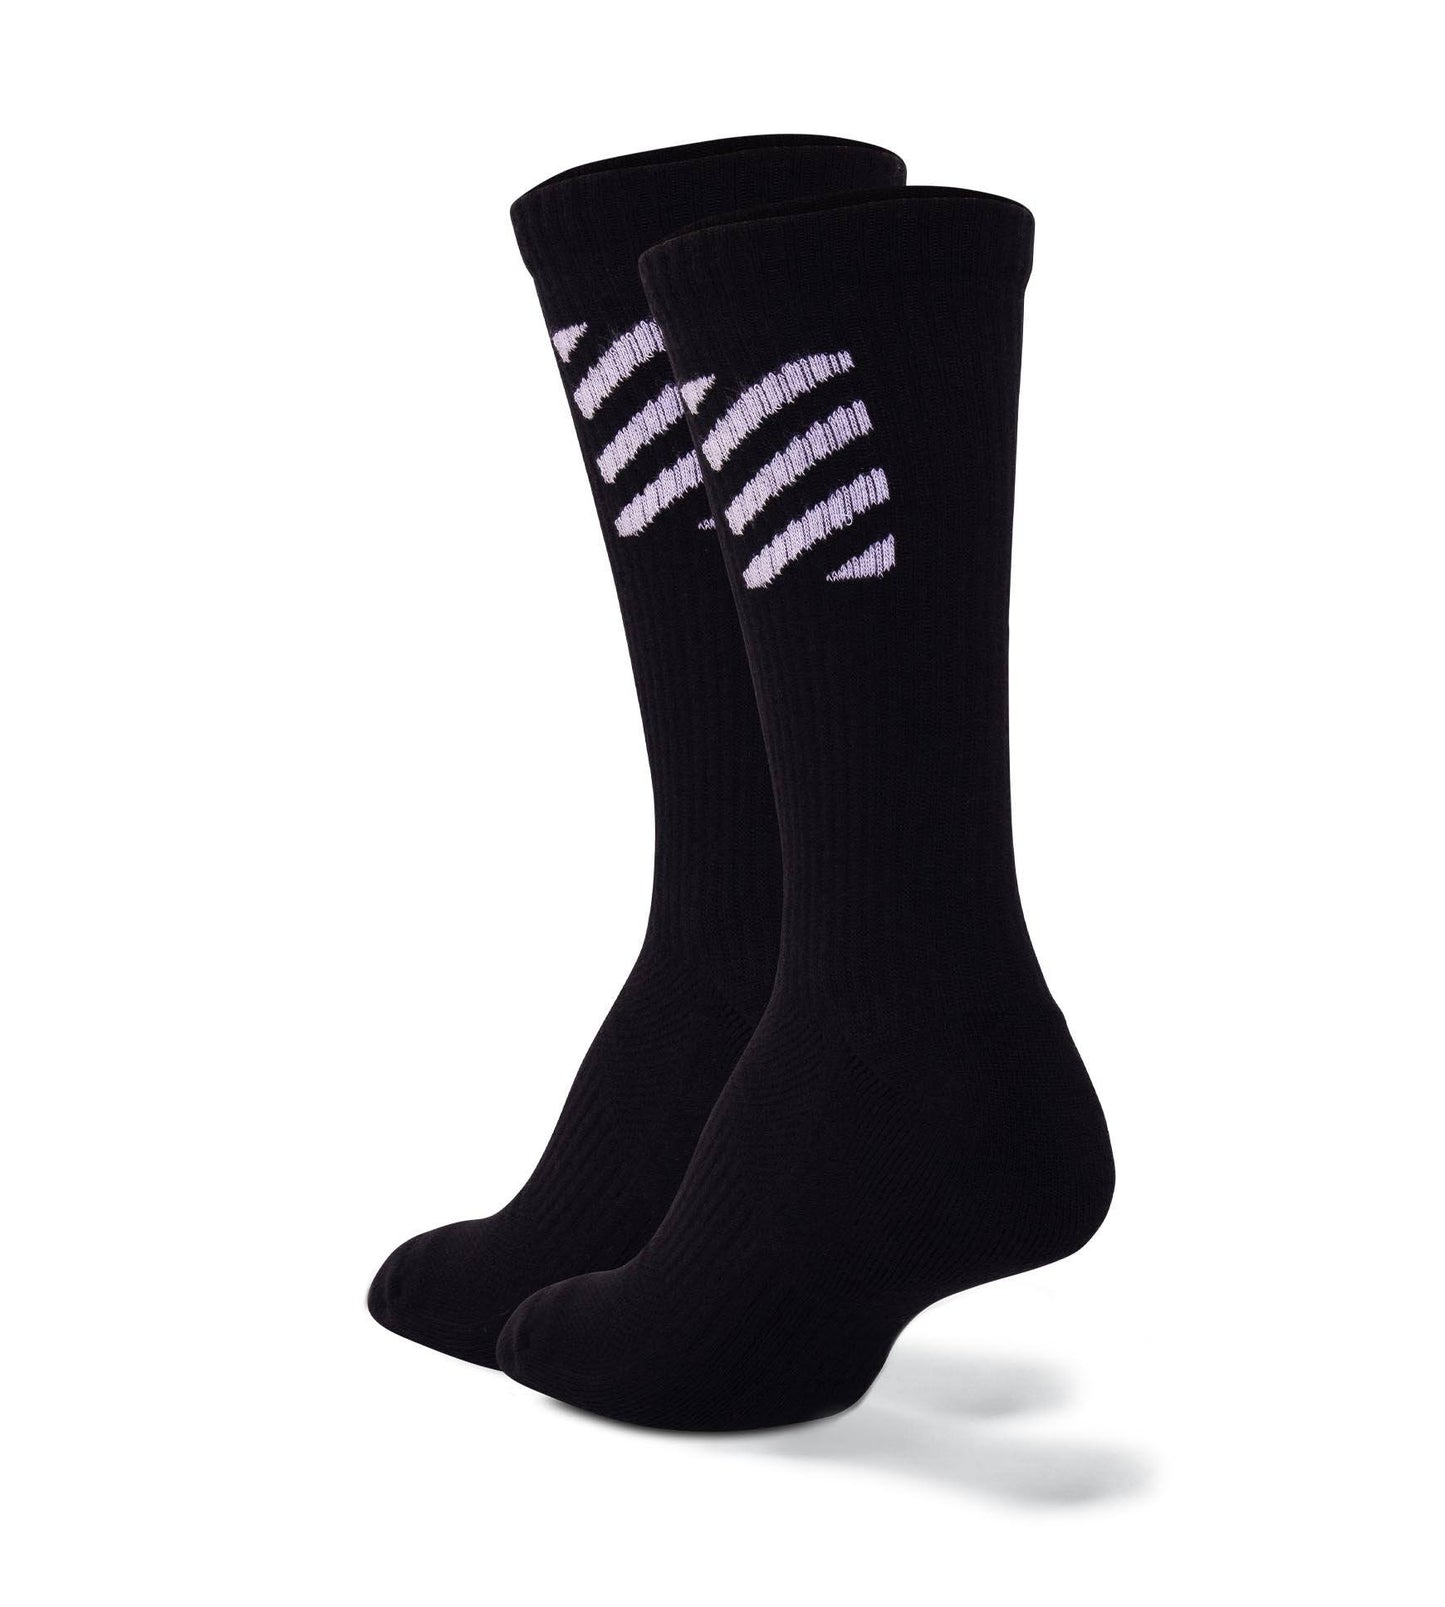 Special Edition Blackout Whiteout Cushion Crew Sock 3 Pack contains colors Black, Dark Gray, Light Gray, Dim gray, Black, Dark slate gray, Black, Lavender, Lights late gray